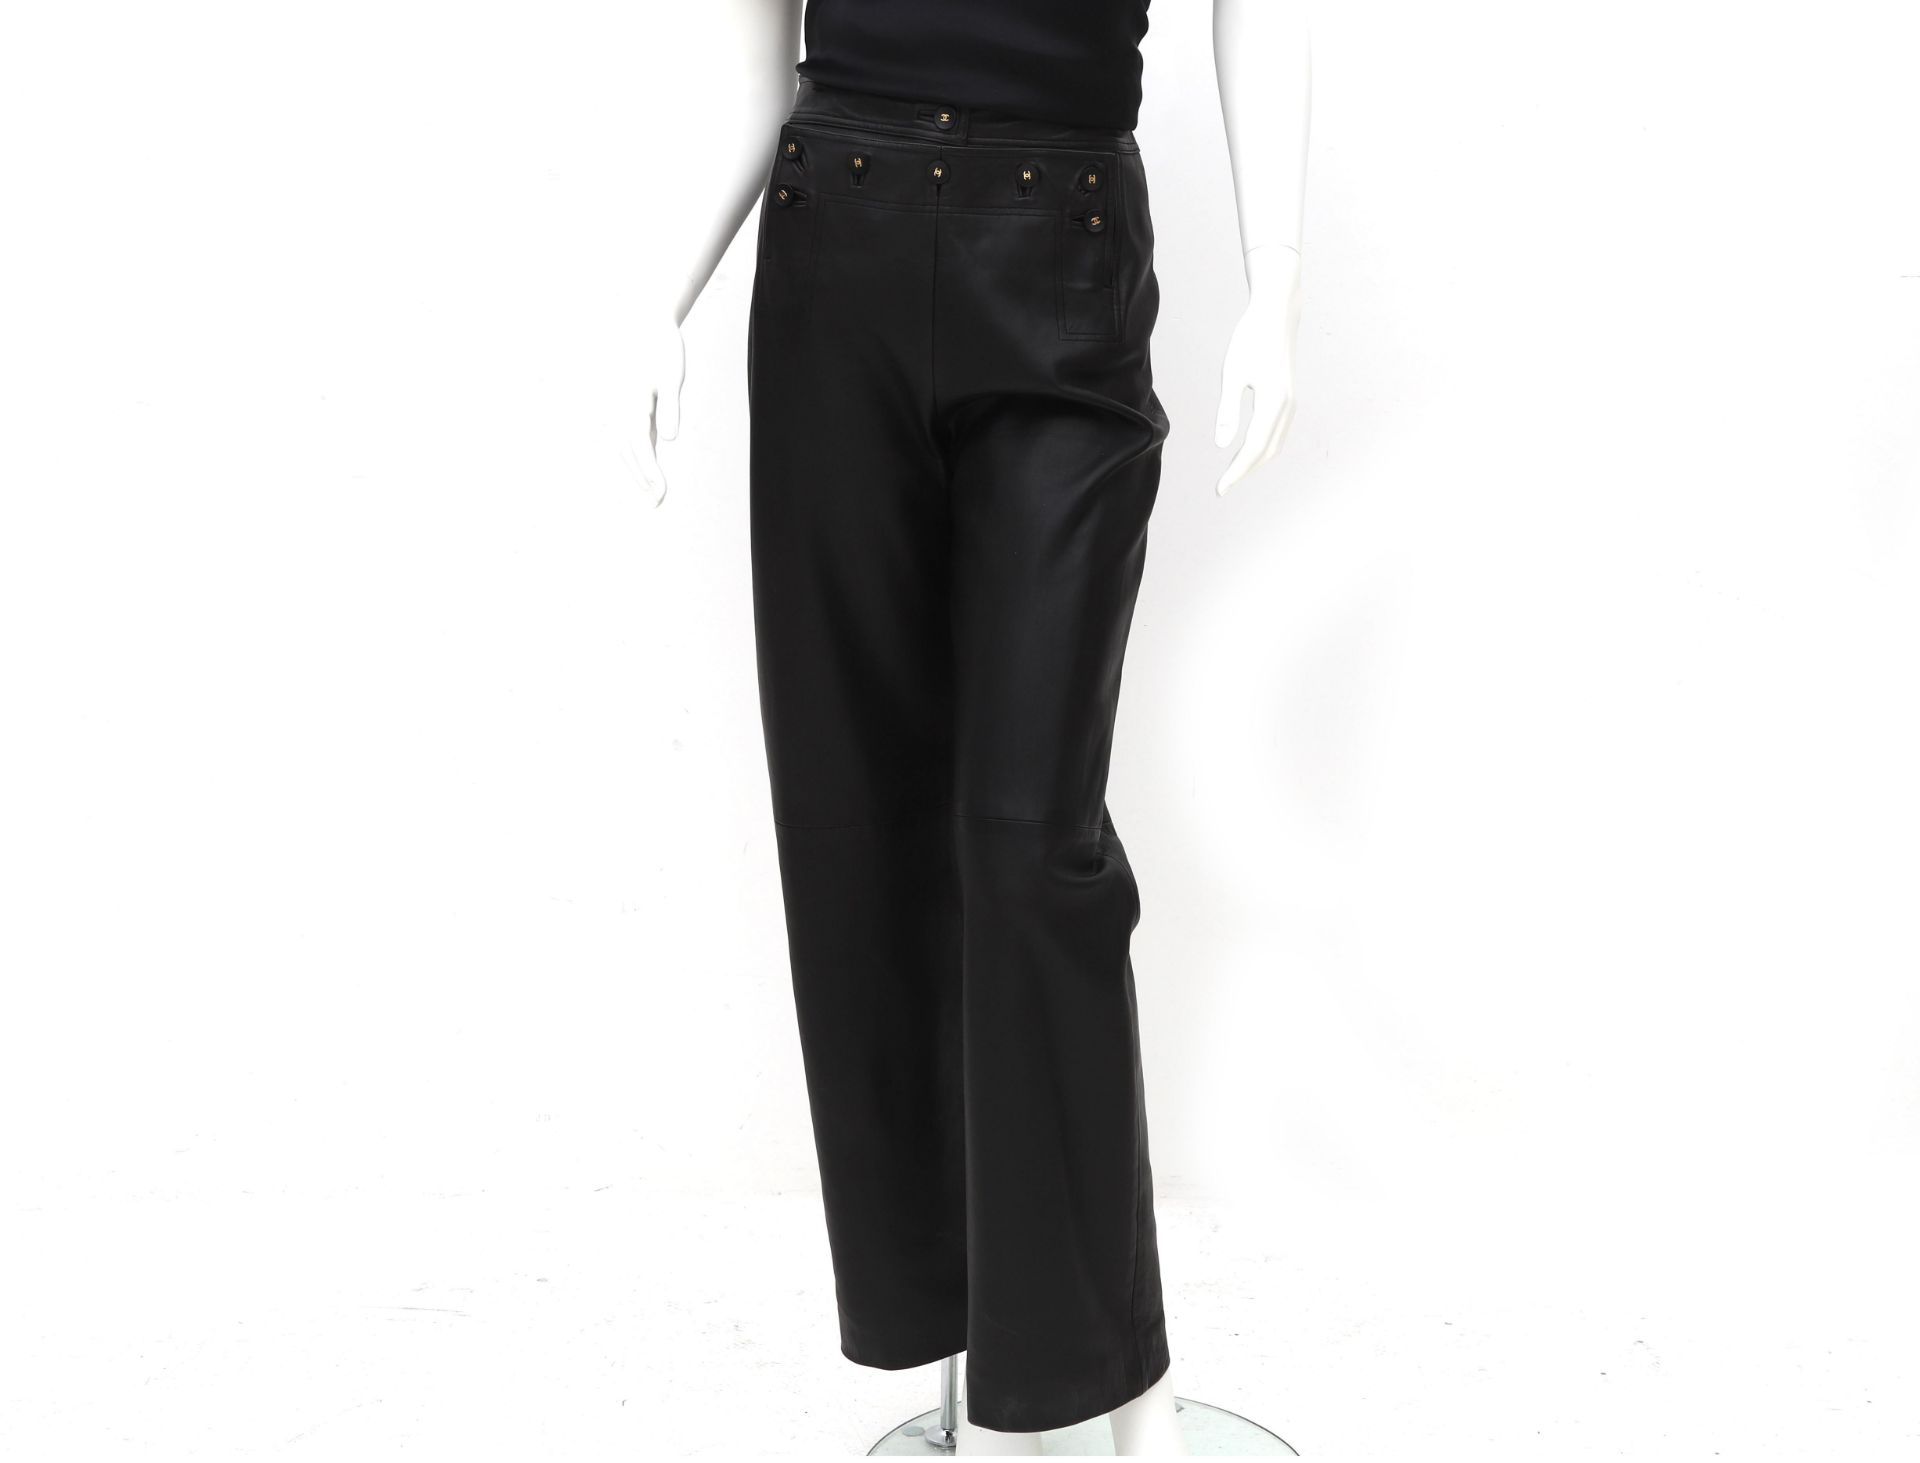 Chanel Boutique black leather pants. The pants have black with gold-colored CC logo buttons at the